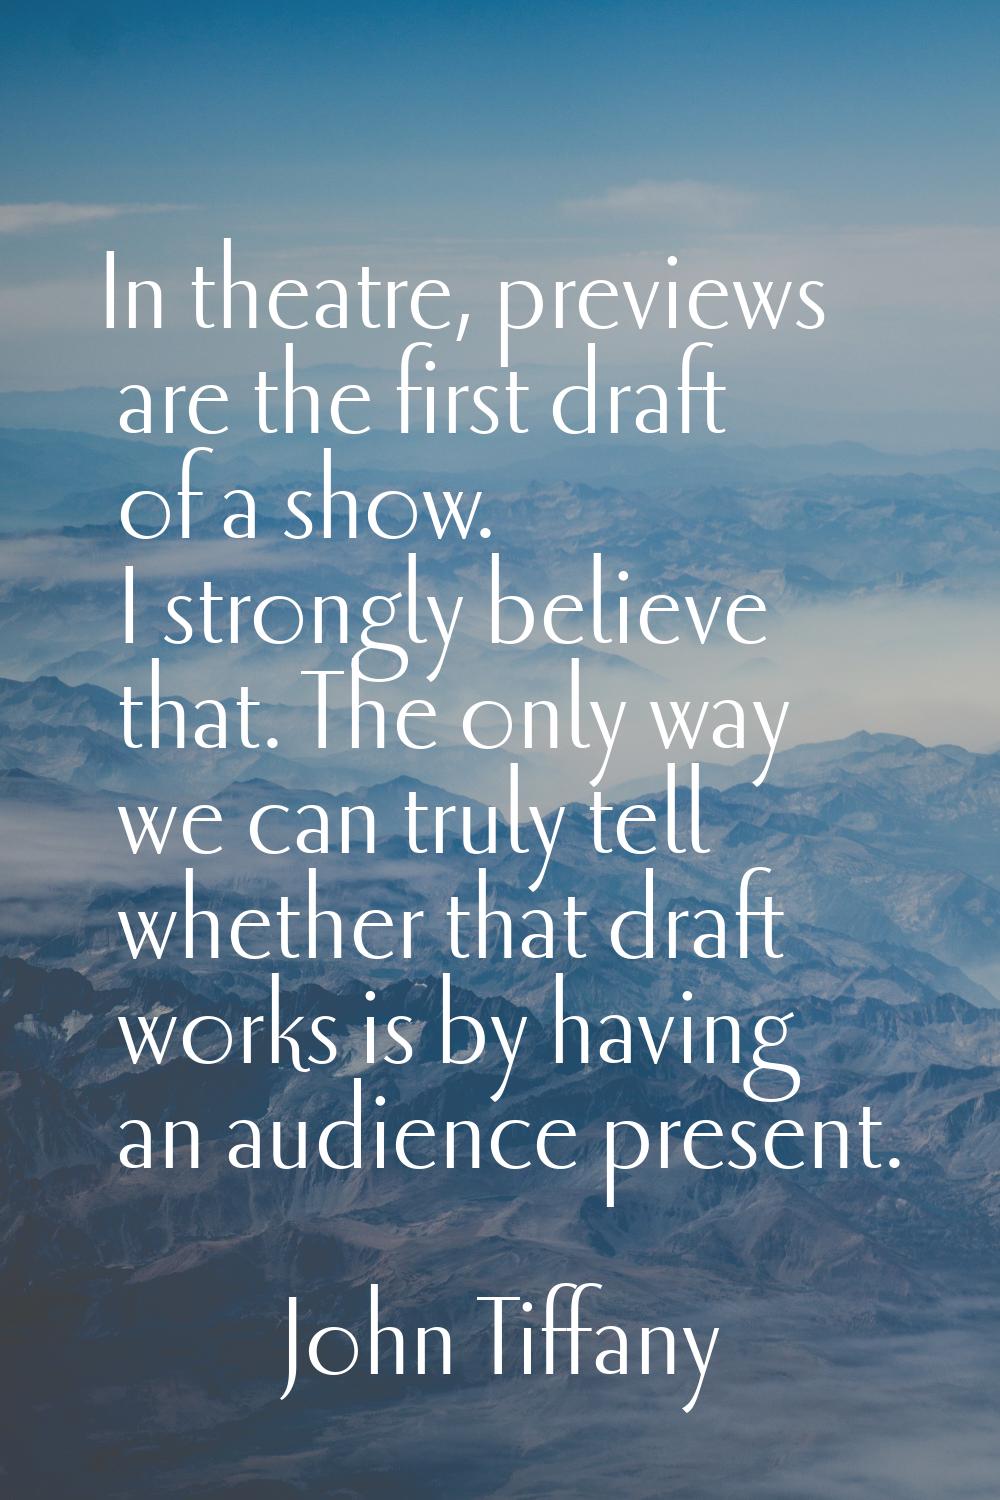 In theatre, previews are the first draft of a show. I strongly believe that. The only way we can tr